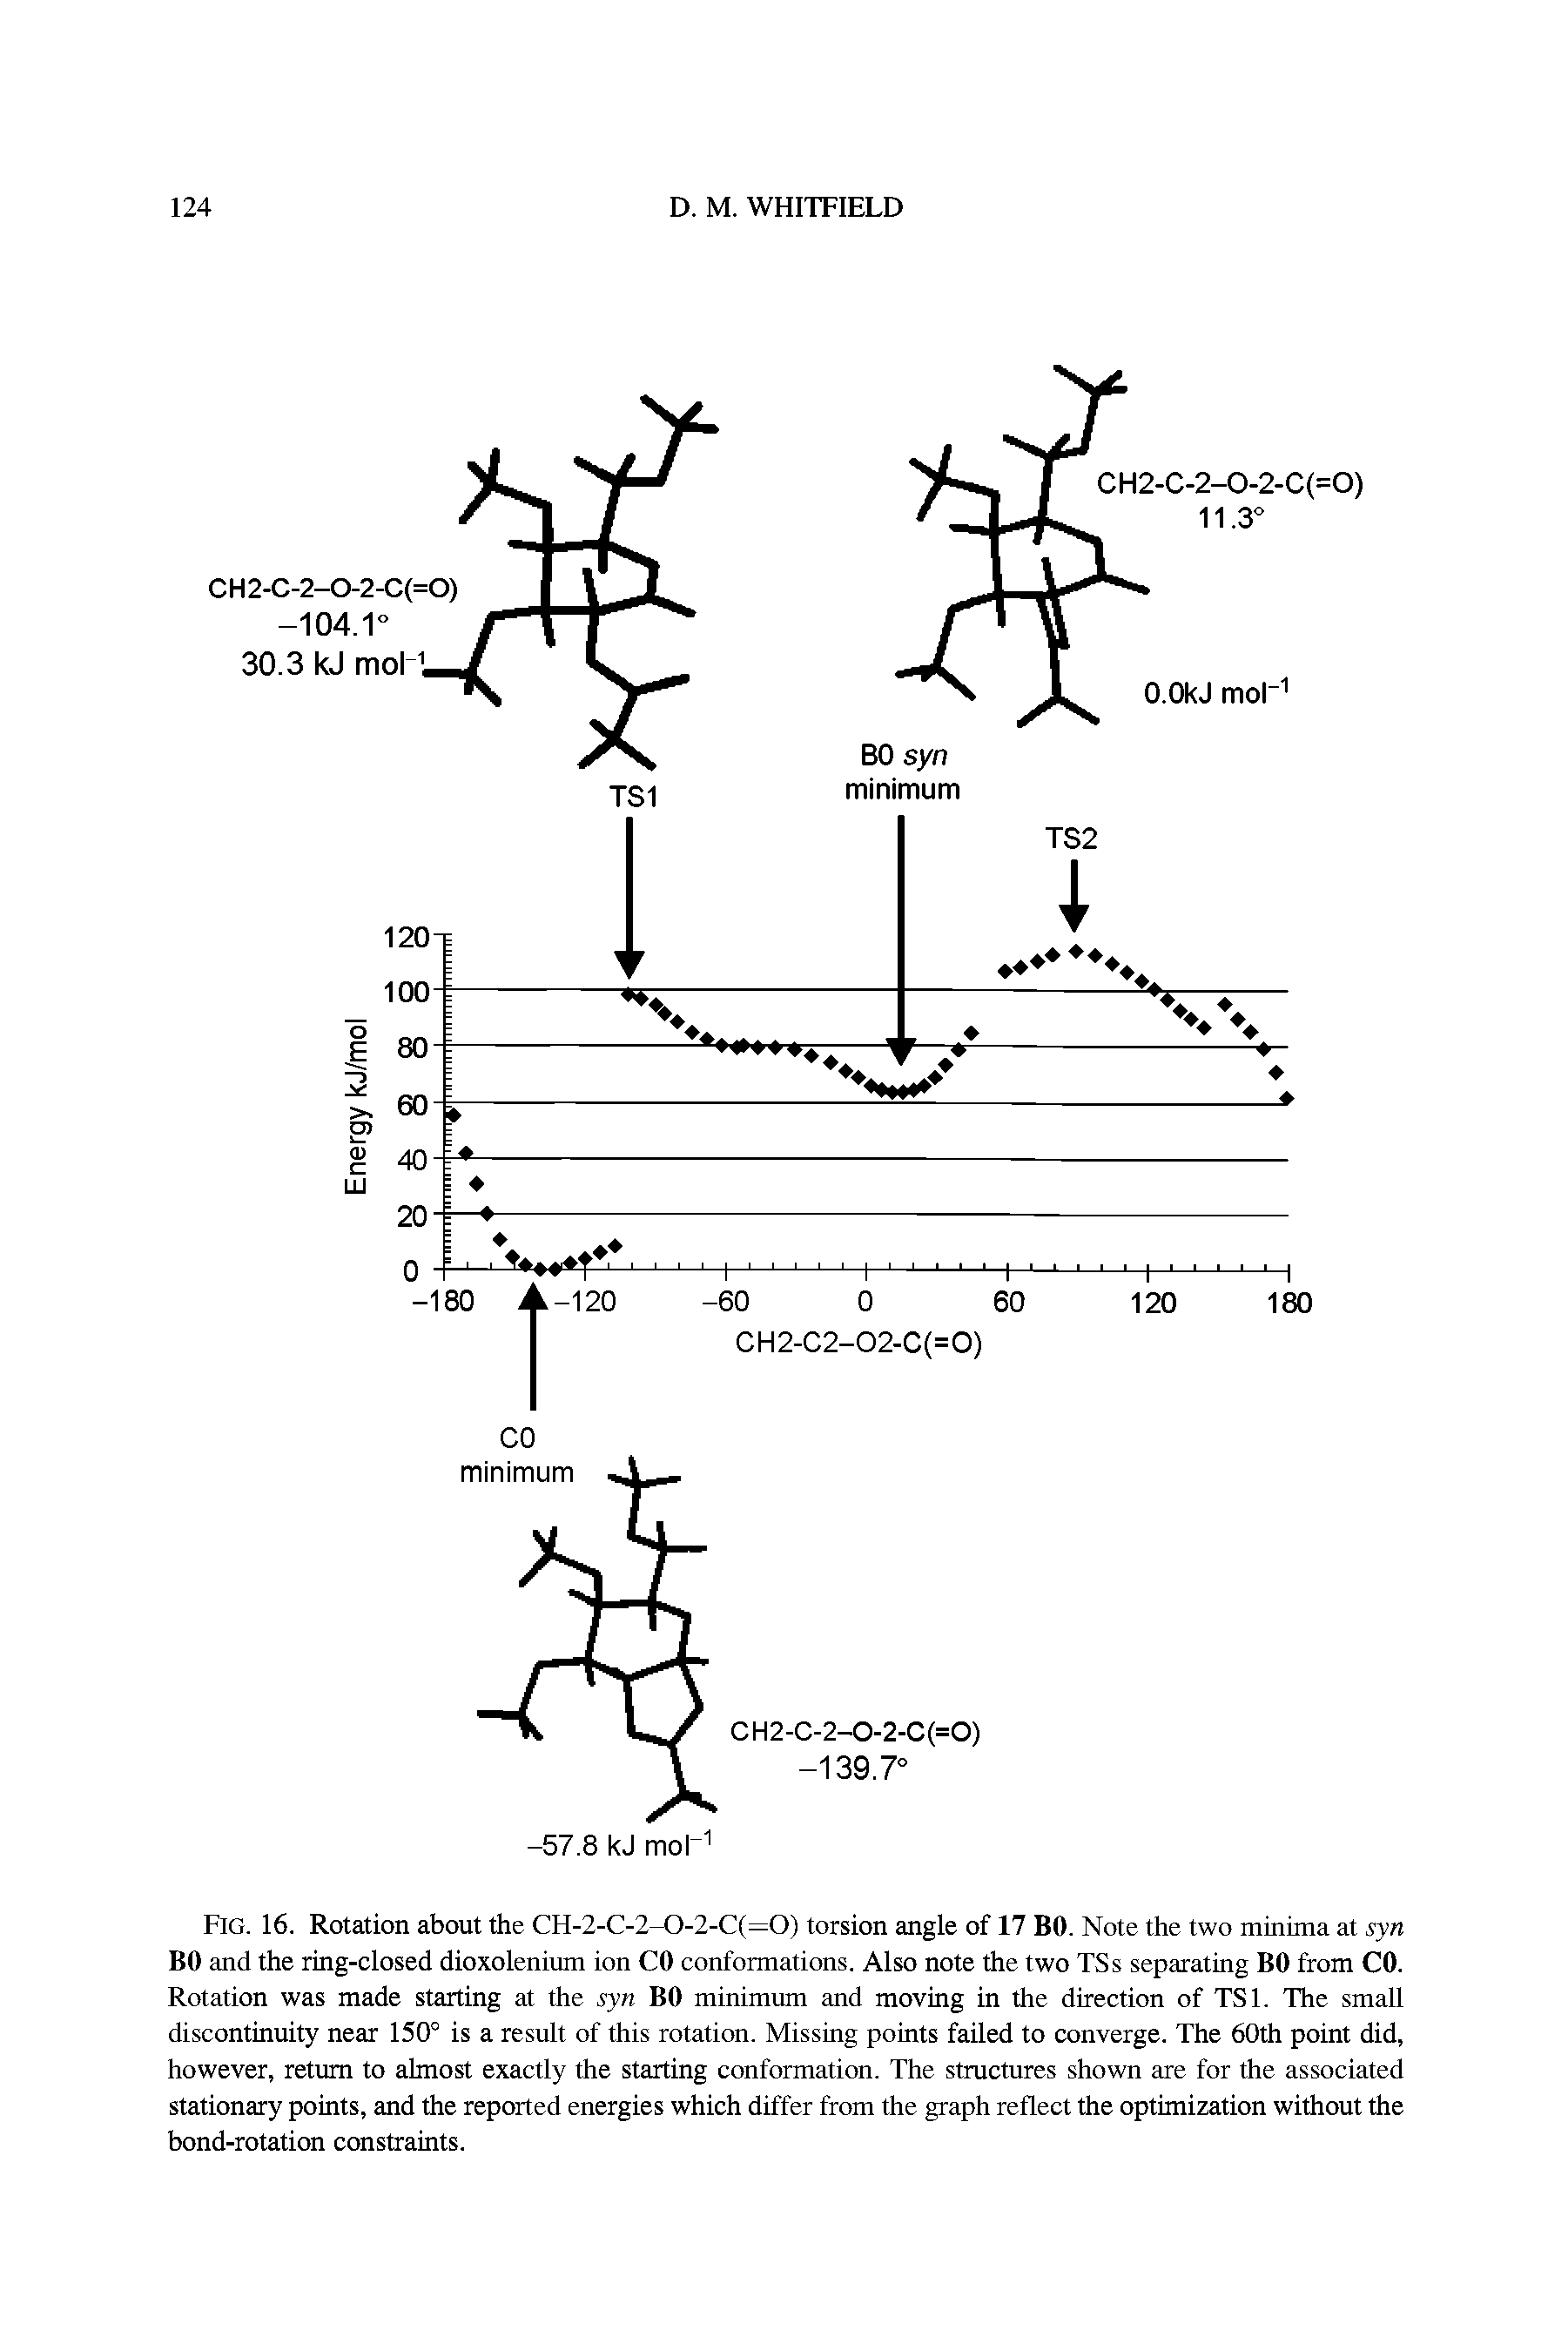 Fig. 16. Rotation about the CH-2-C-2-0-2-C(=0) torsion angle of 17 BO. Note the two minima at syn BO and the ring-closed dioxolenium ion CO conformations. Also note the two TSs separating BO from CO. Rotation was made starting at the syn BO minimum and moving in the direction of TS1. The small discontinuity near 150° is a result of this rotation. Missing points failed to converge. The 60th point did, however, return to almost exactly the starting conformation. The structures shown are for the associated stationary points, and the reported energies which differ from the graph reflect the optimization without the bond-rotation constraints.